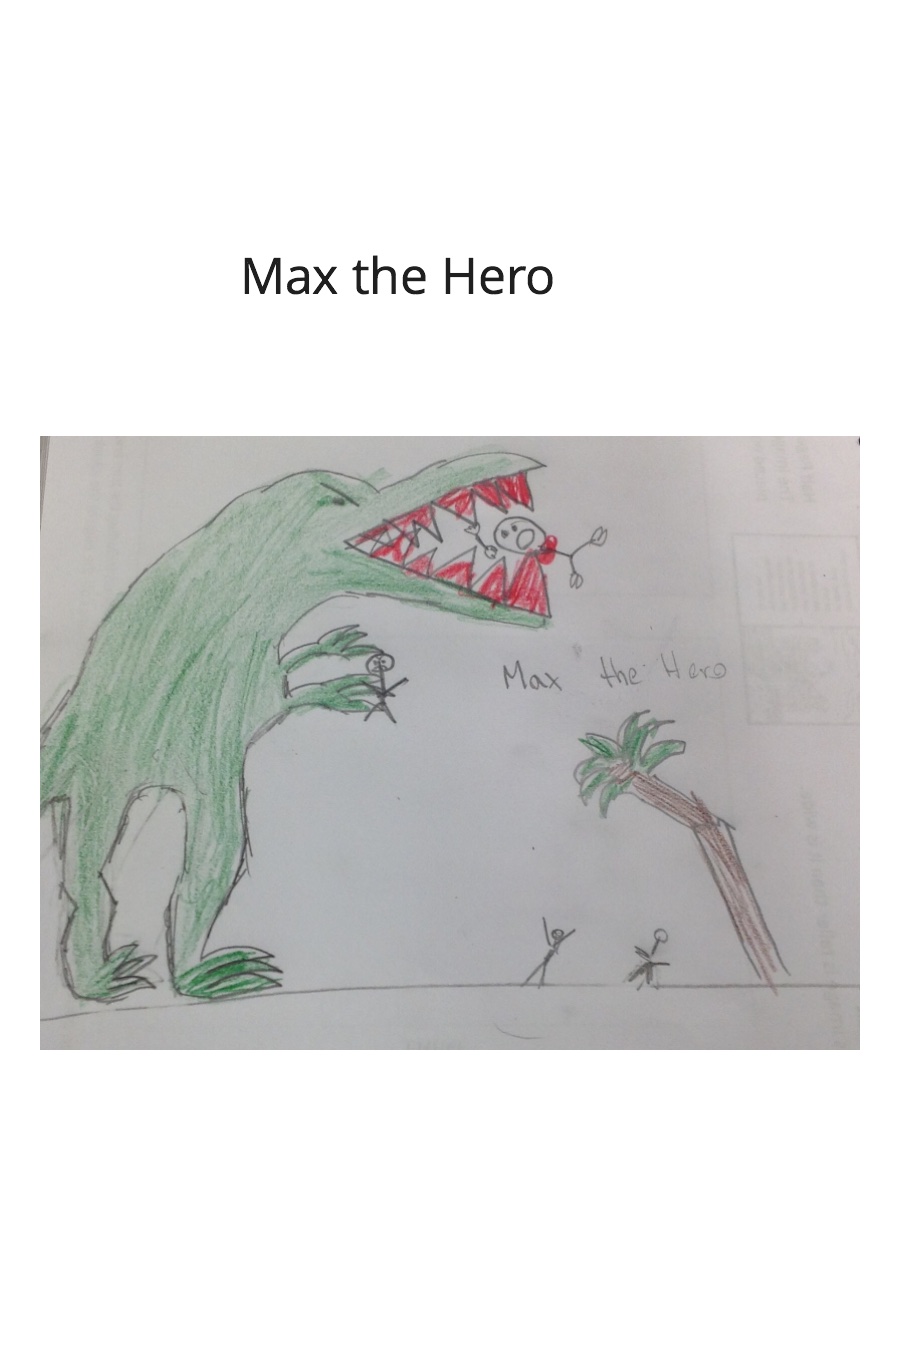 Max the Hero by Eric G